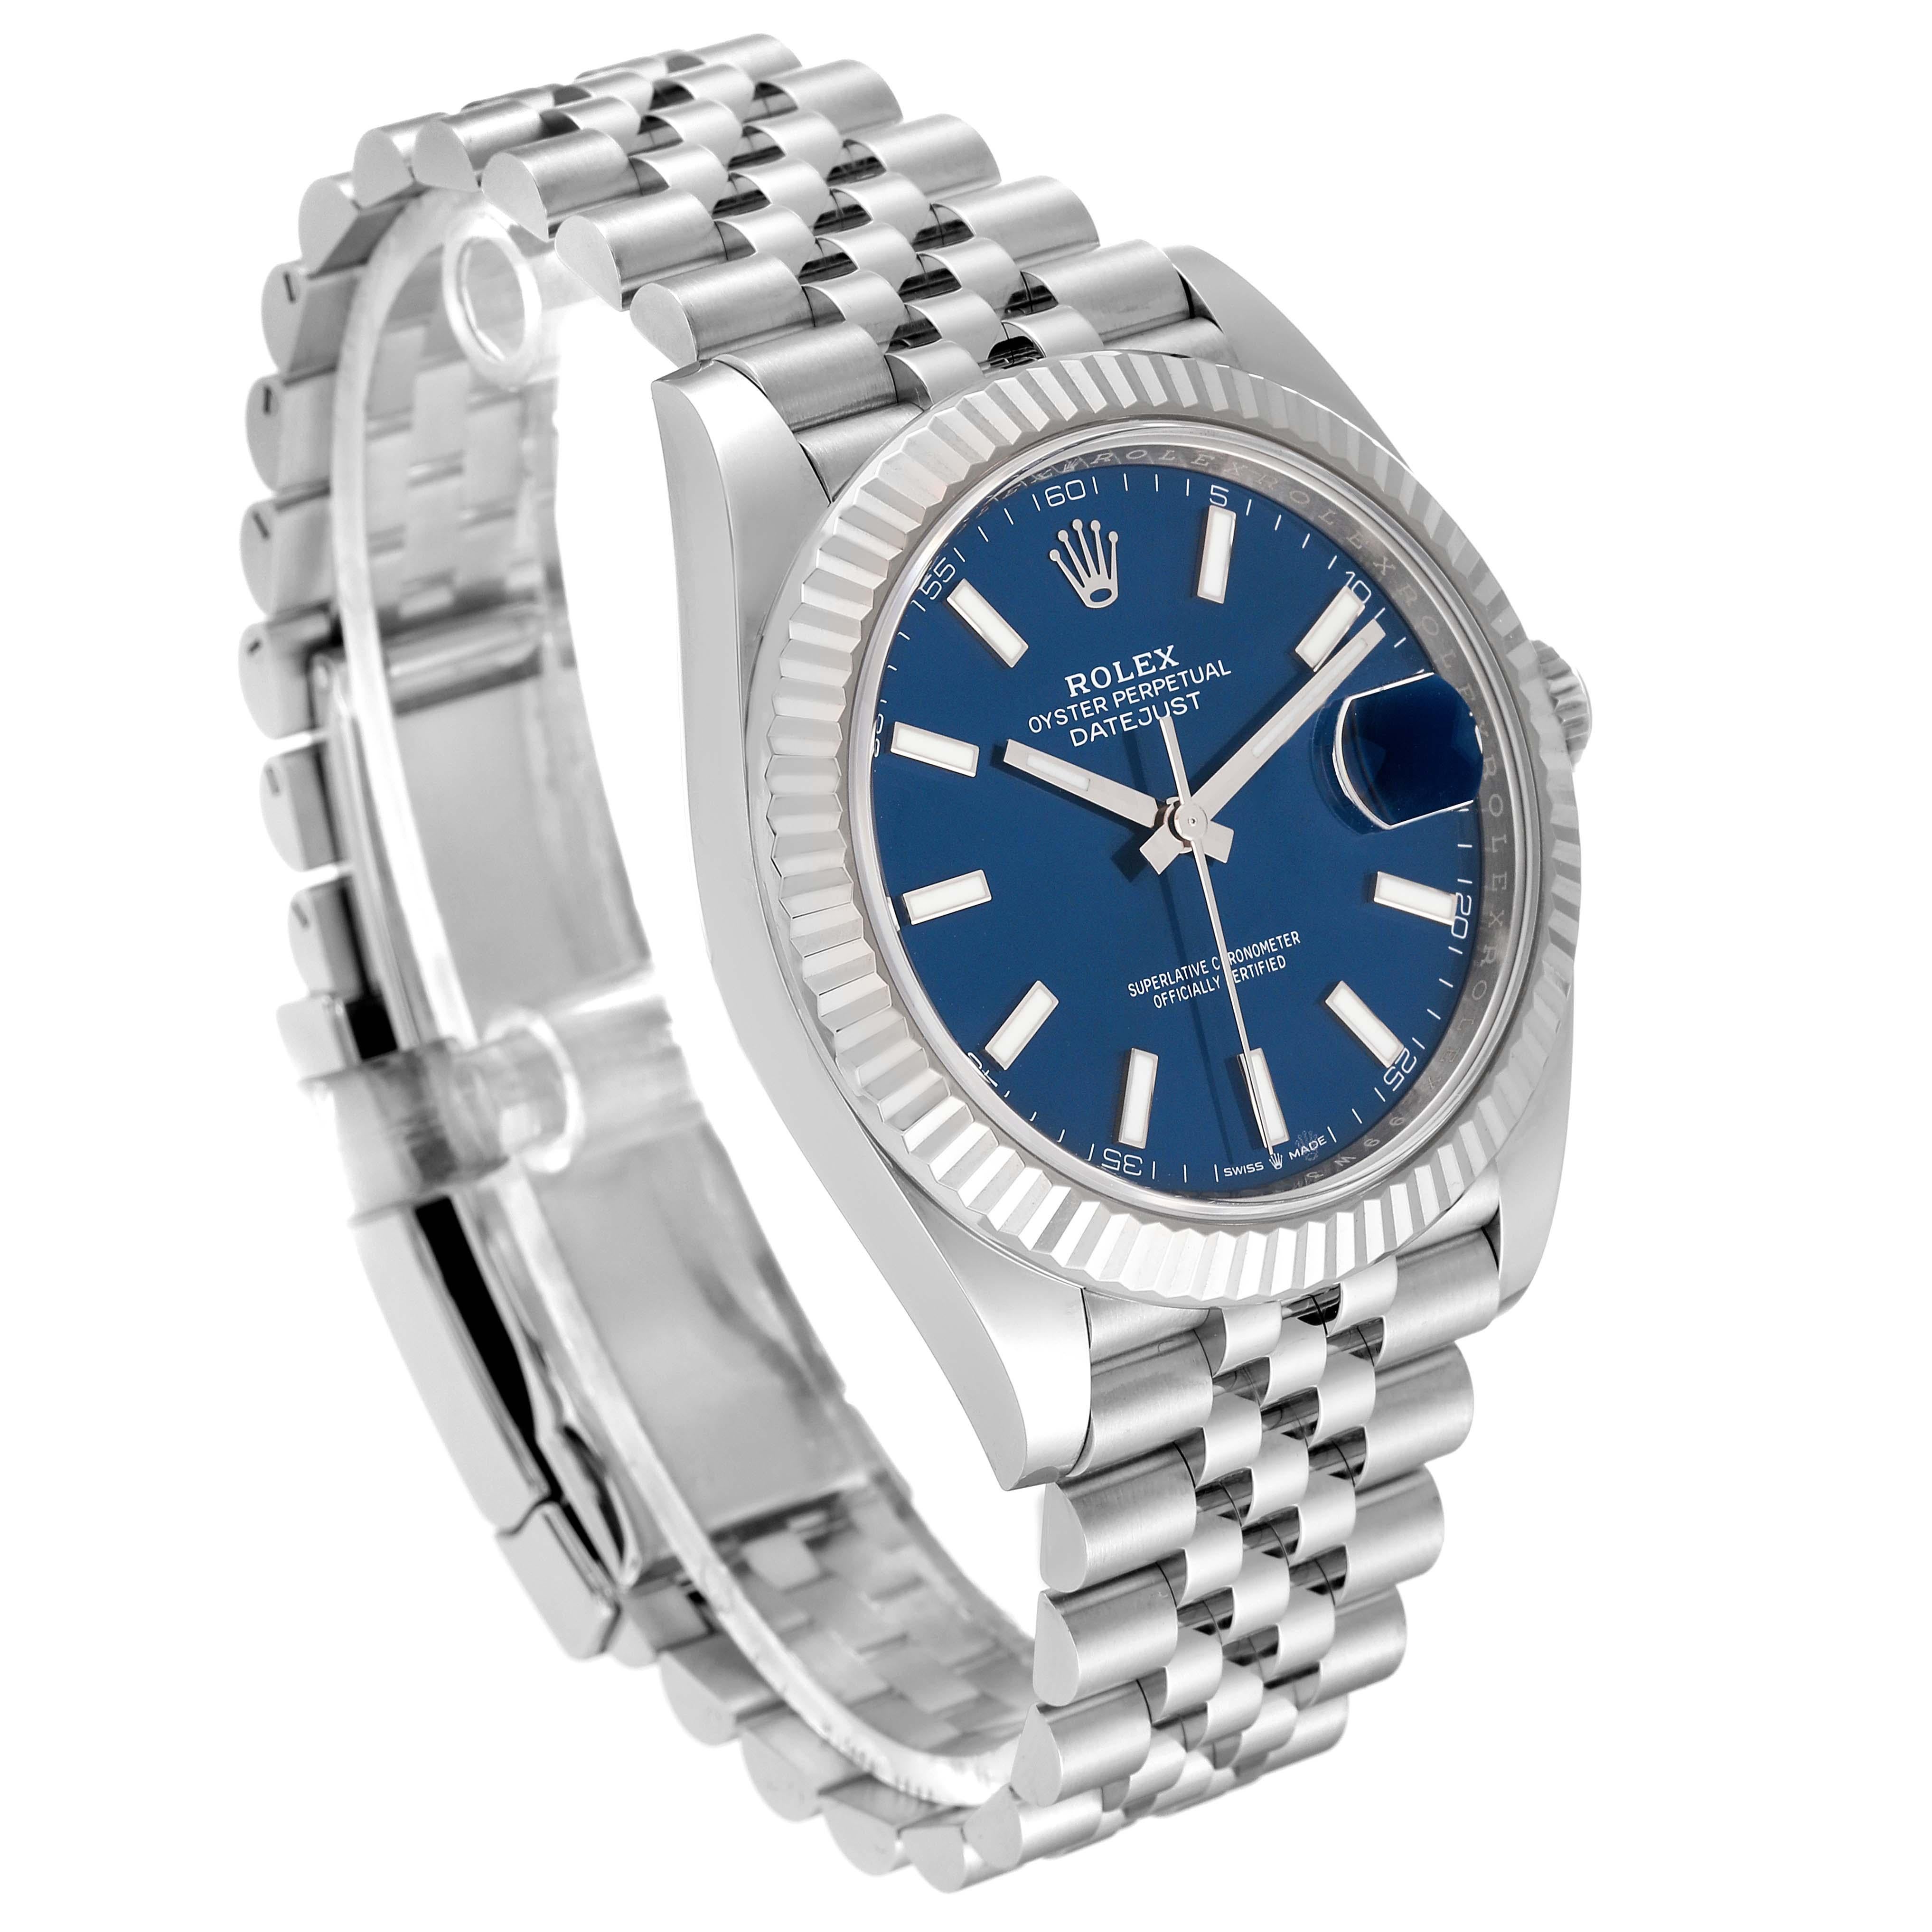 Rolex Datejust 41 Steel White Gold Blue Dial Mens Watch 126334 Box Card 8